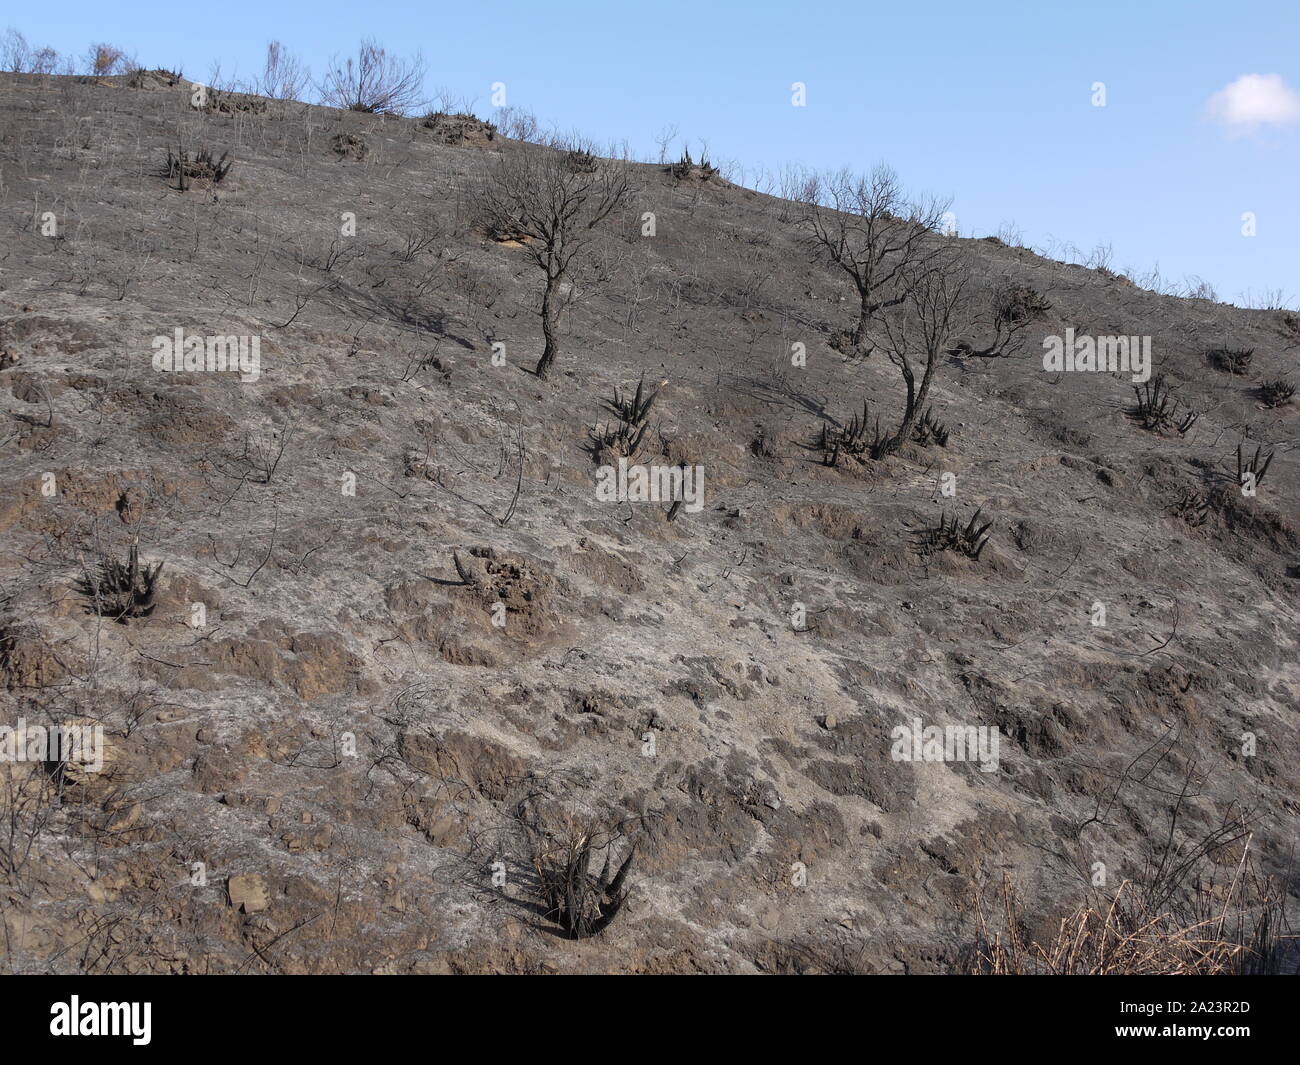 Mount burned by fire charred plants Stock Photo